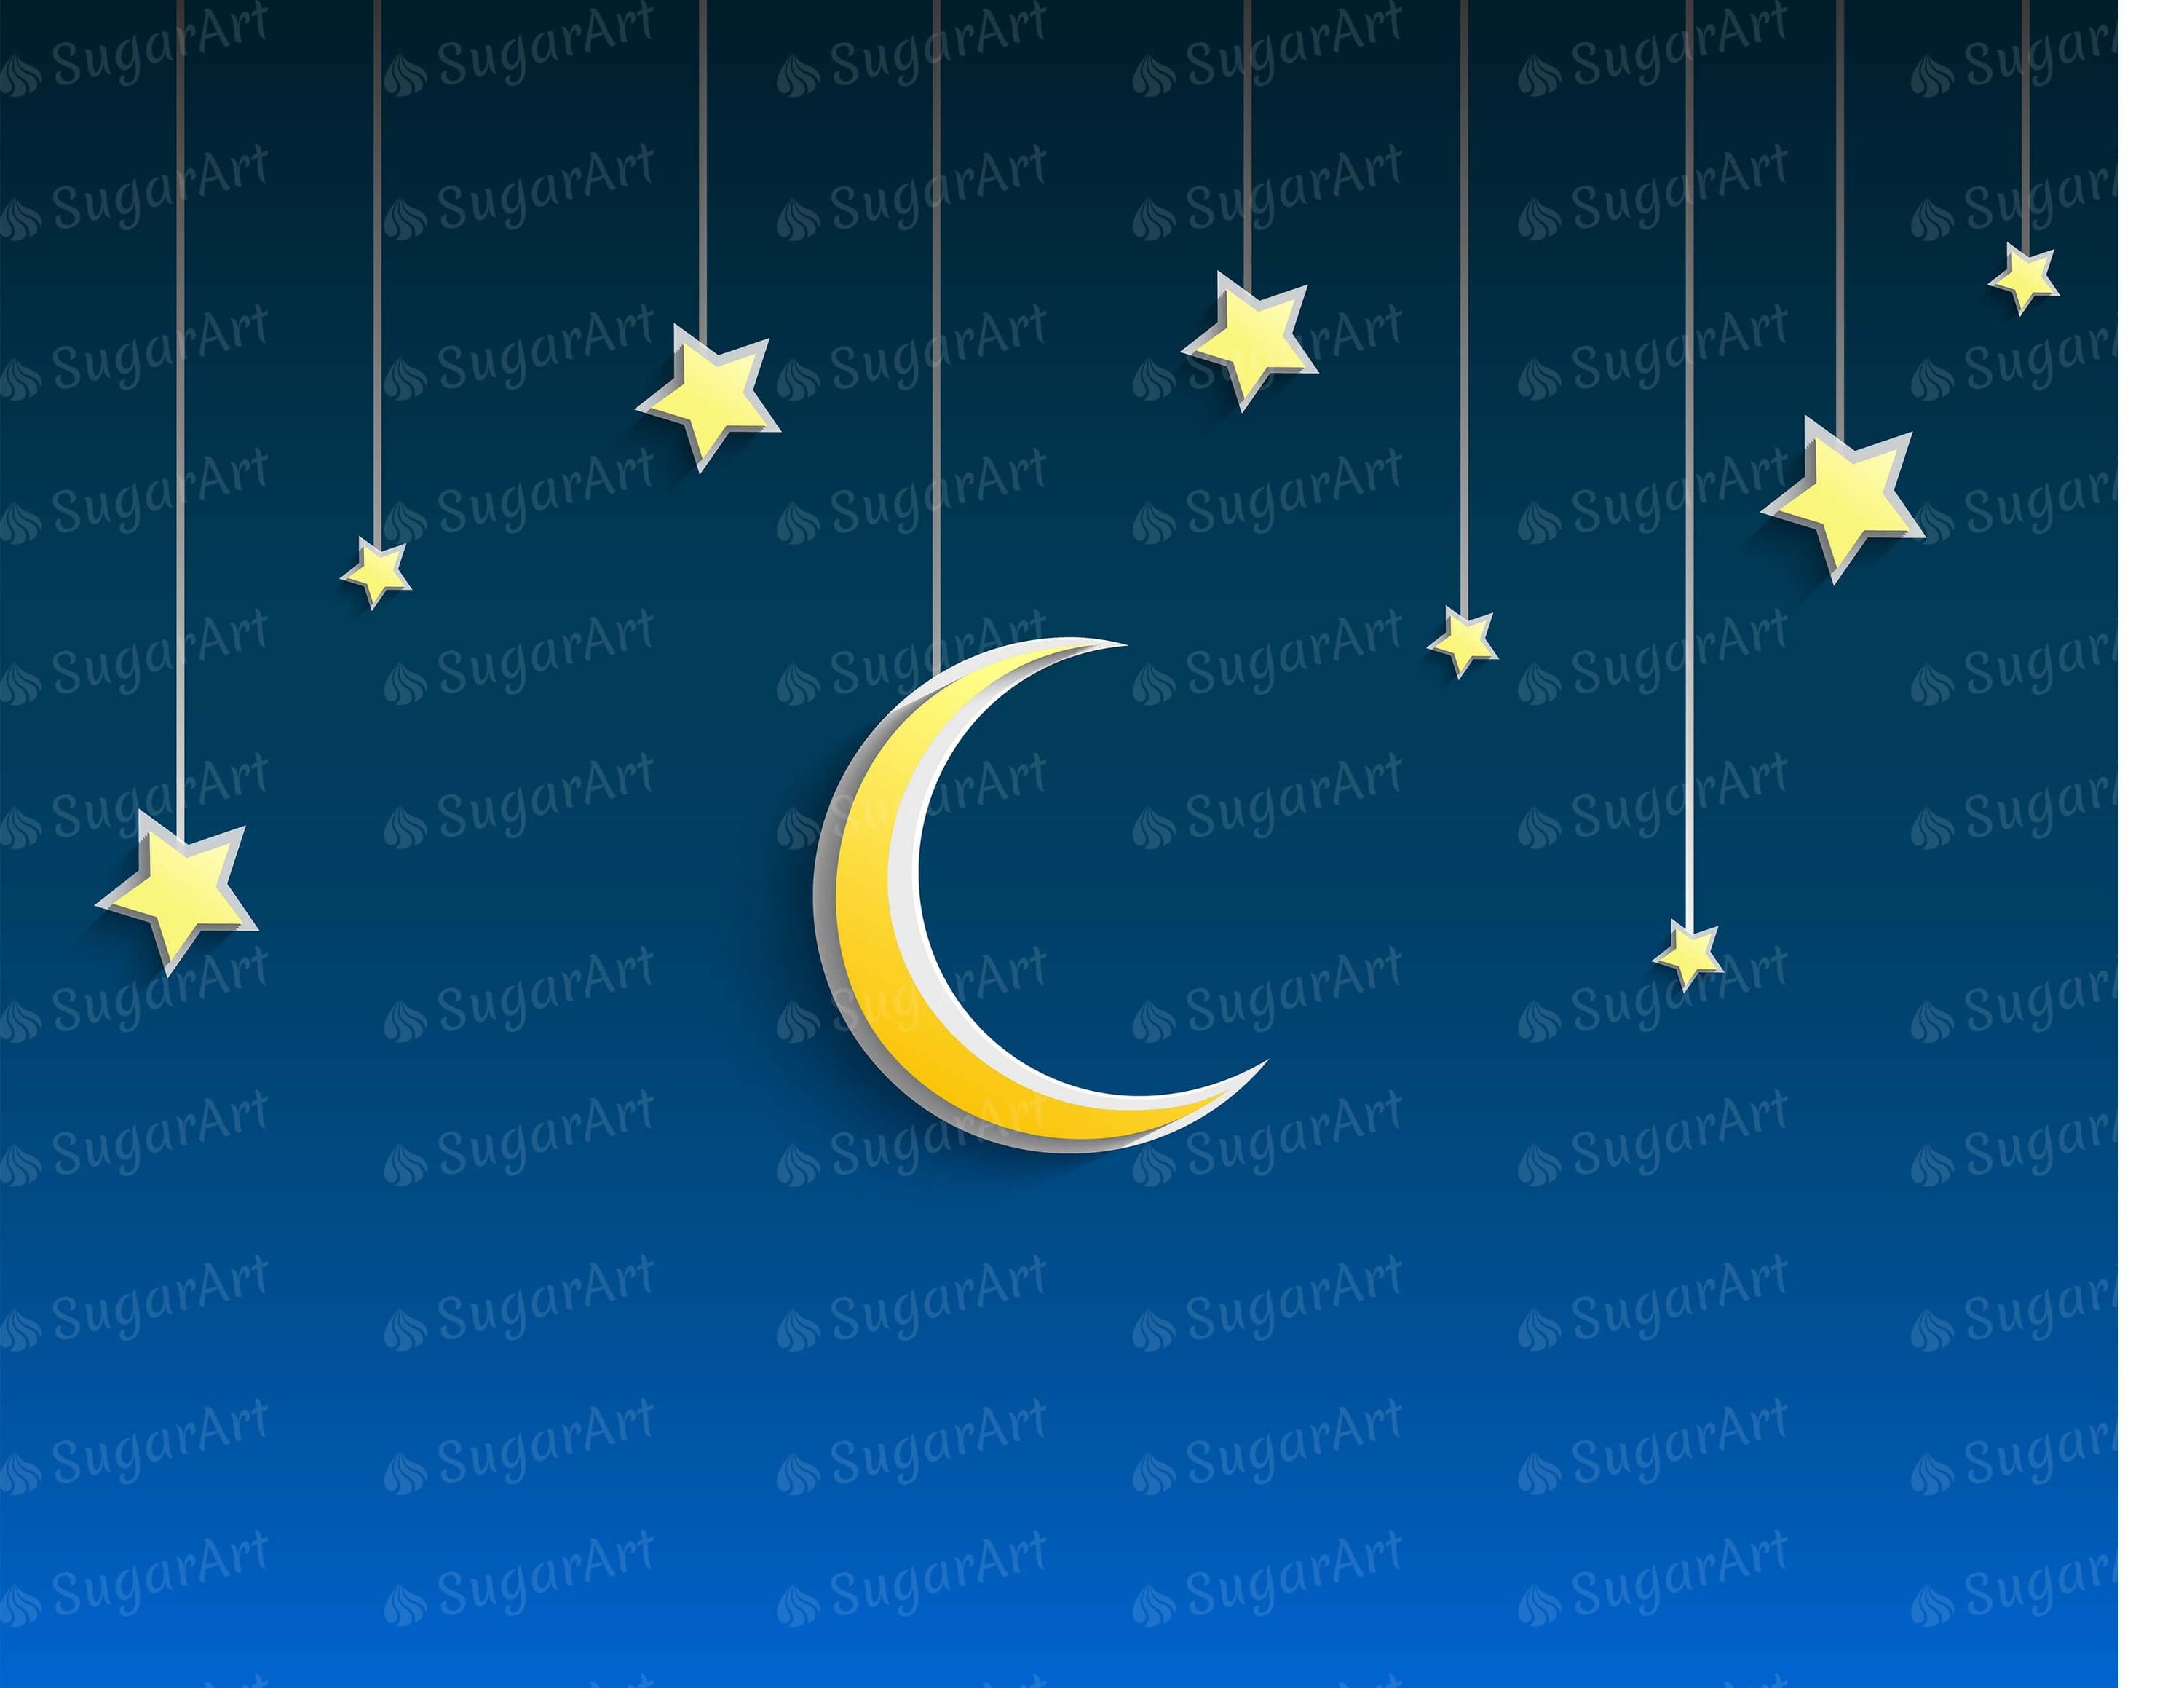 Stars and Crescent Moon on Blue Background - Icing - ISA232.